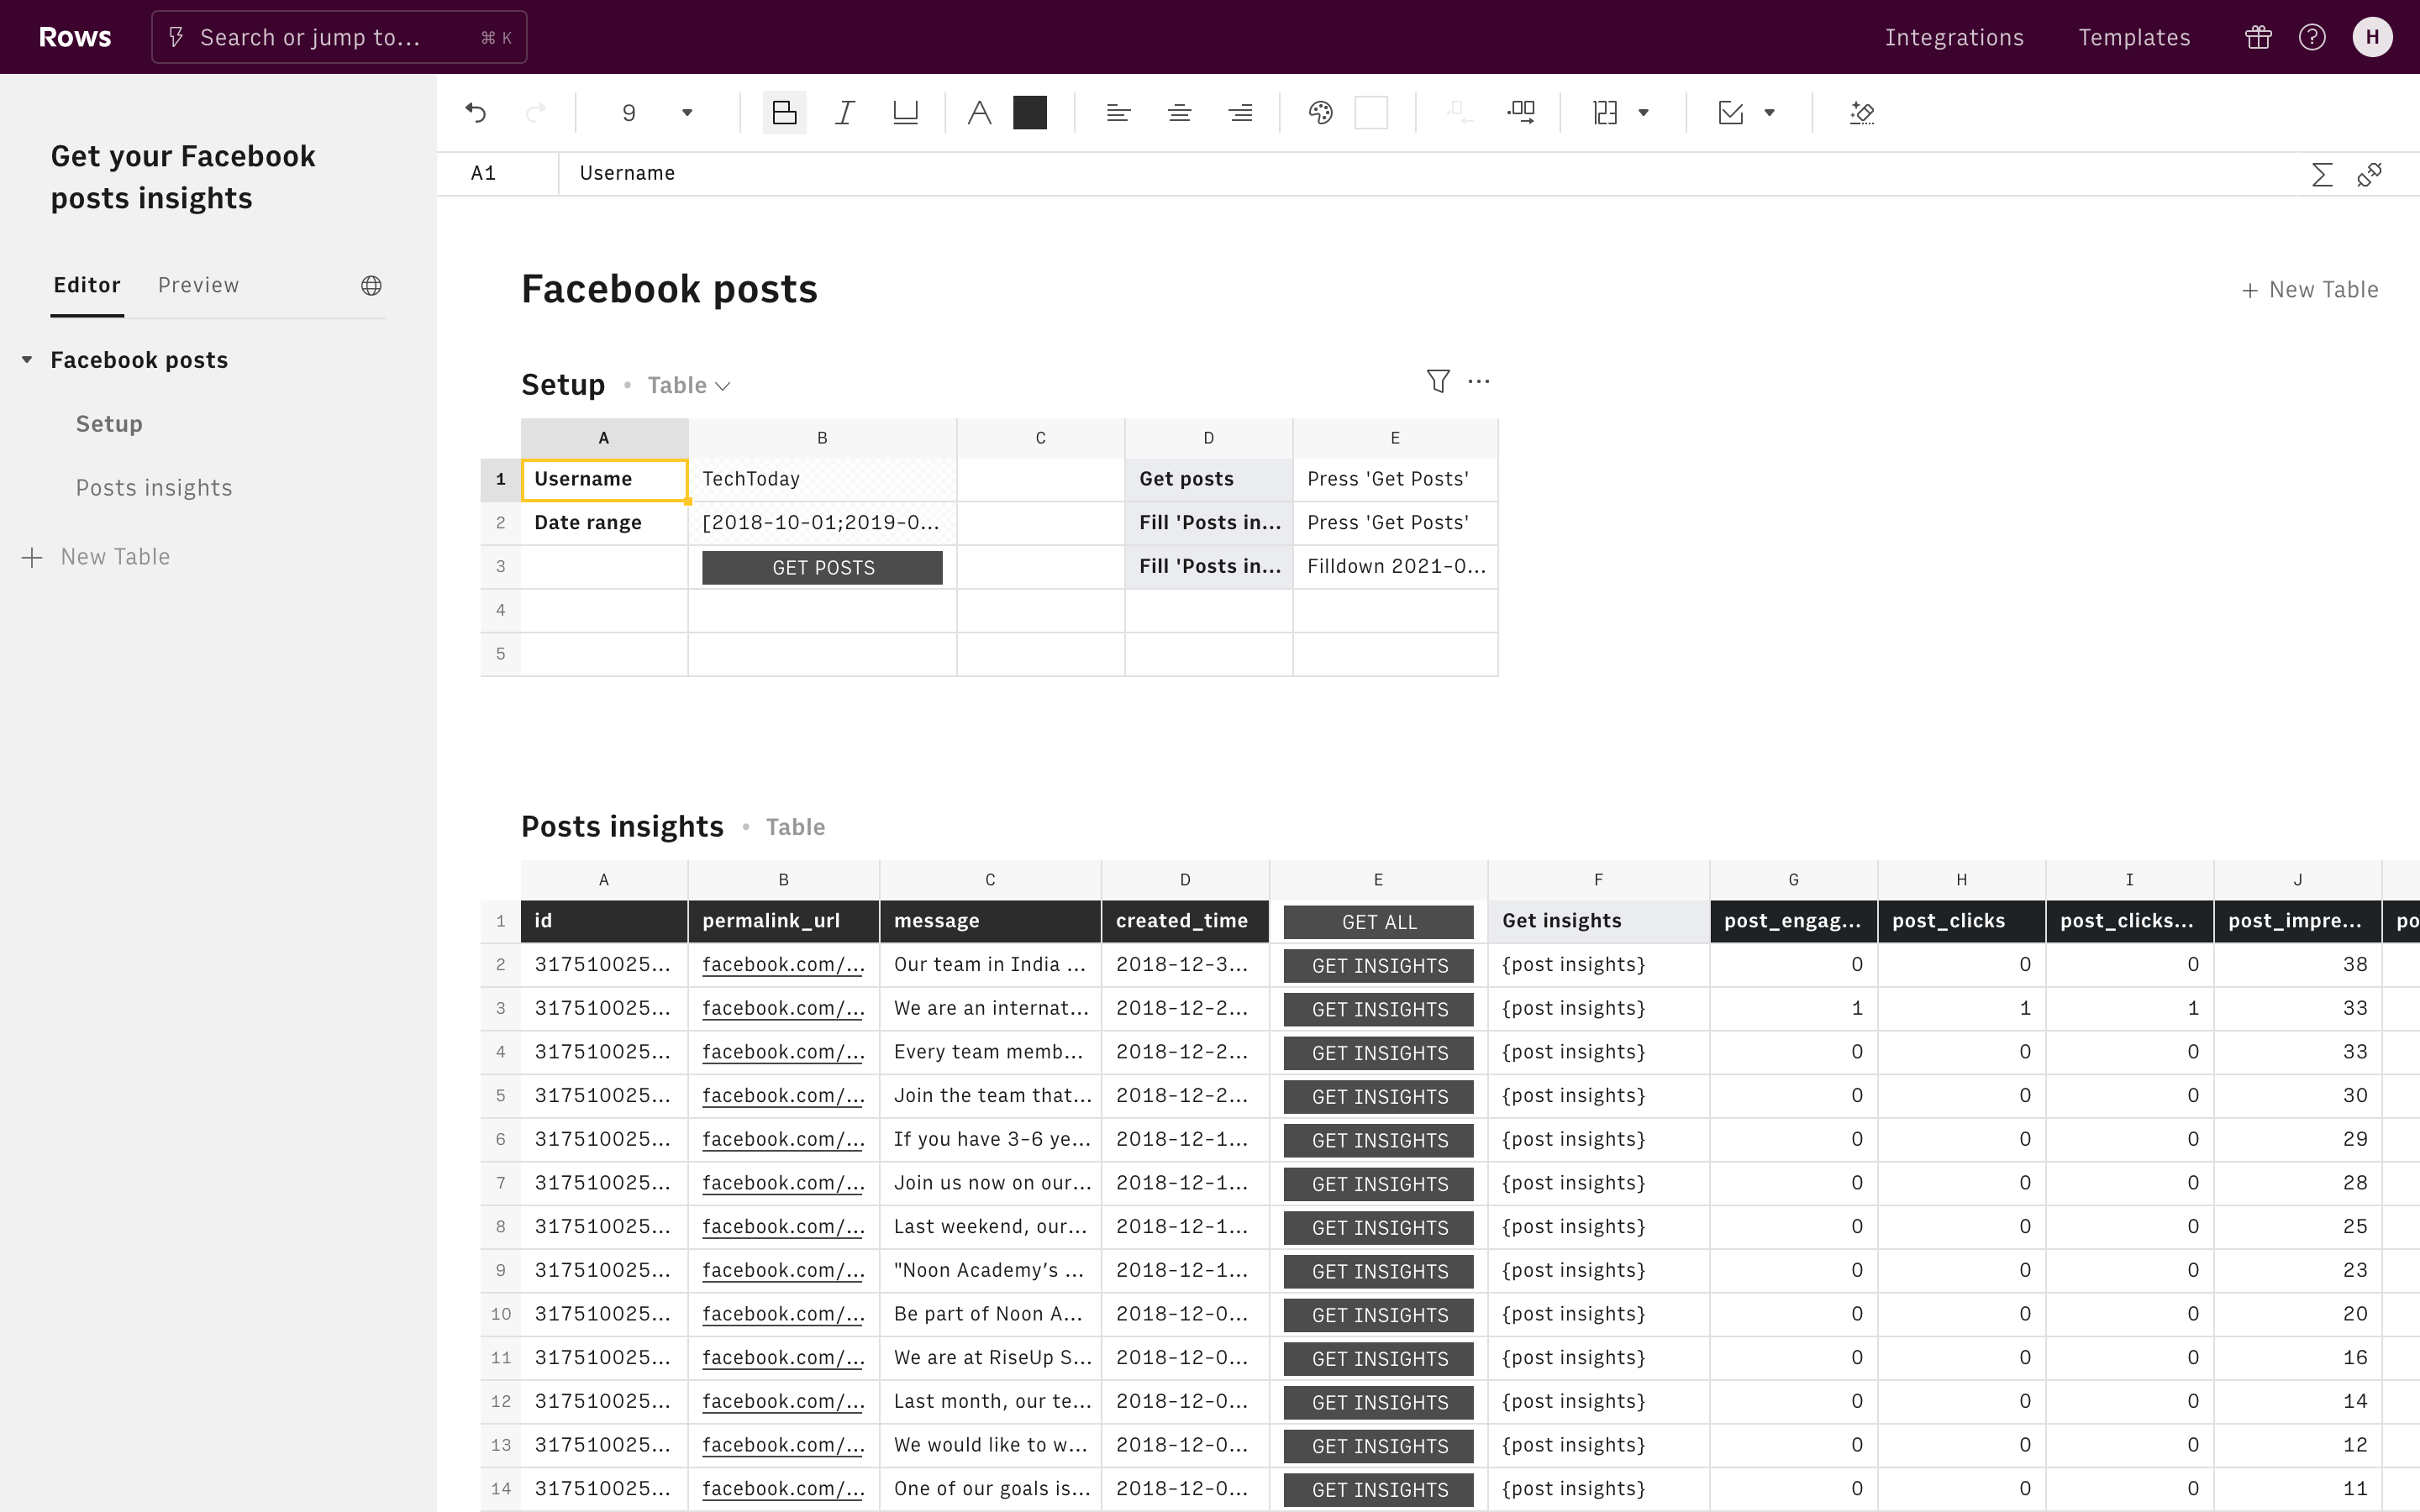 Get your Facebook posts insights Editor